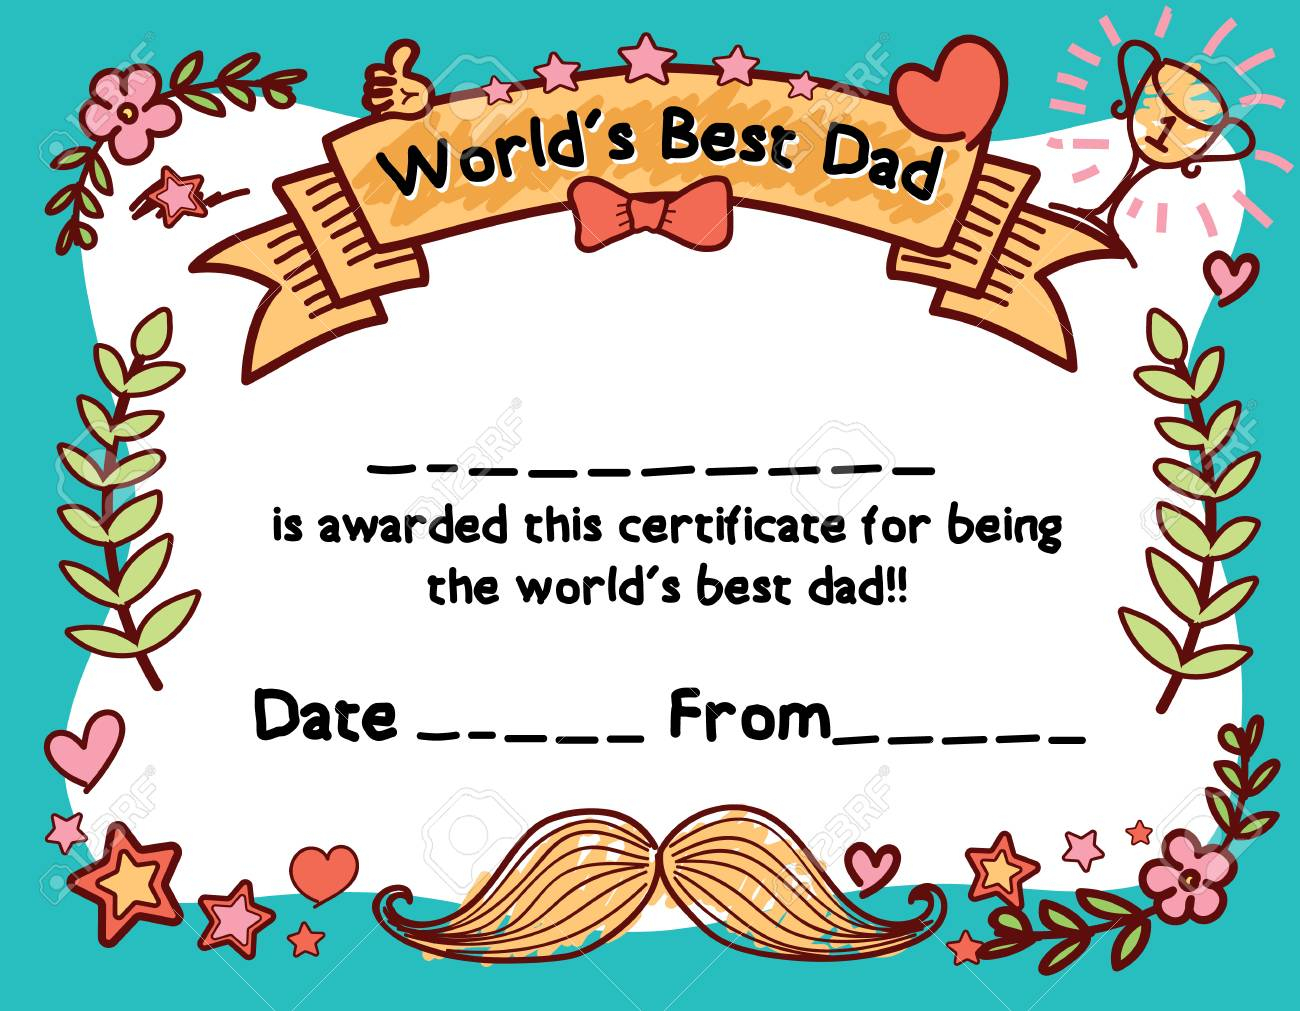 World's Best Dad Award Certificate Template For Father's Day Inside Player Of The Day Certificate Template